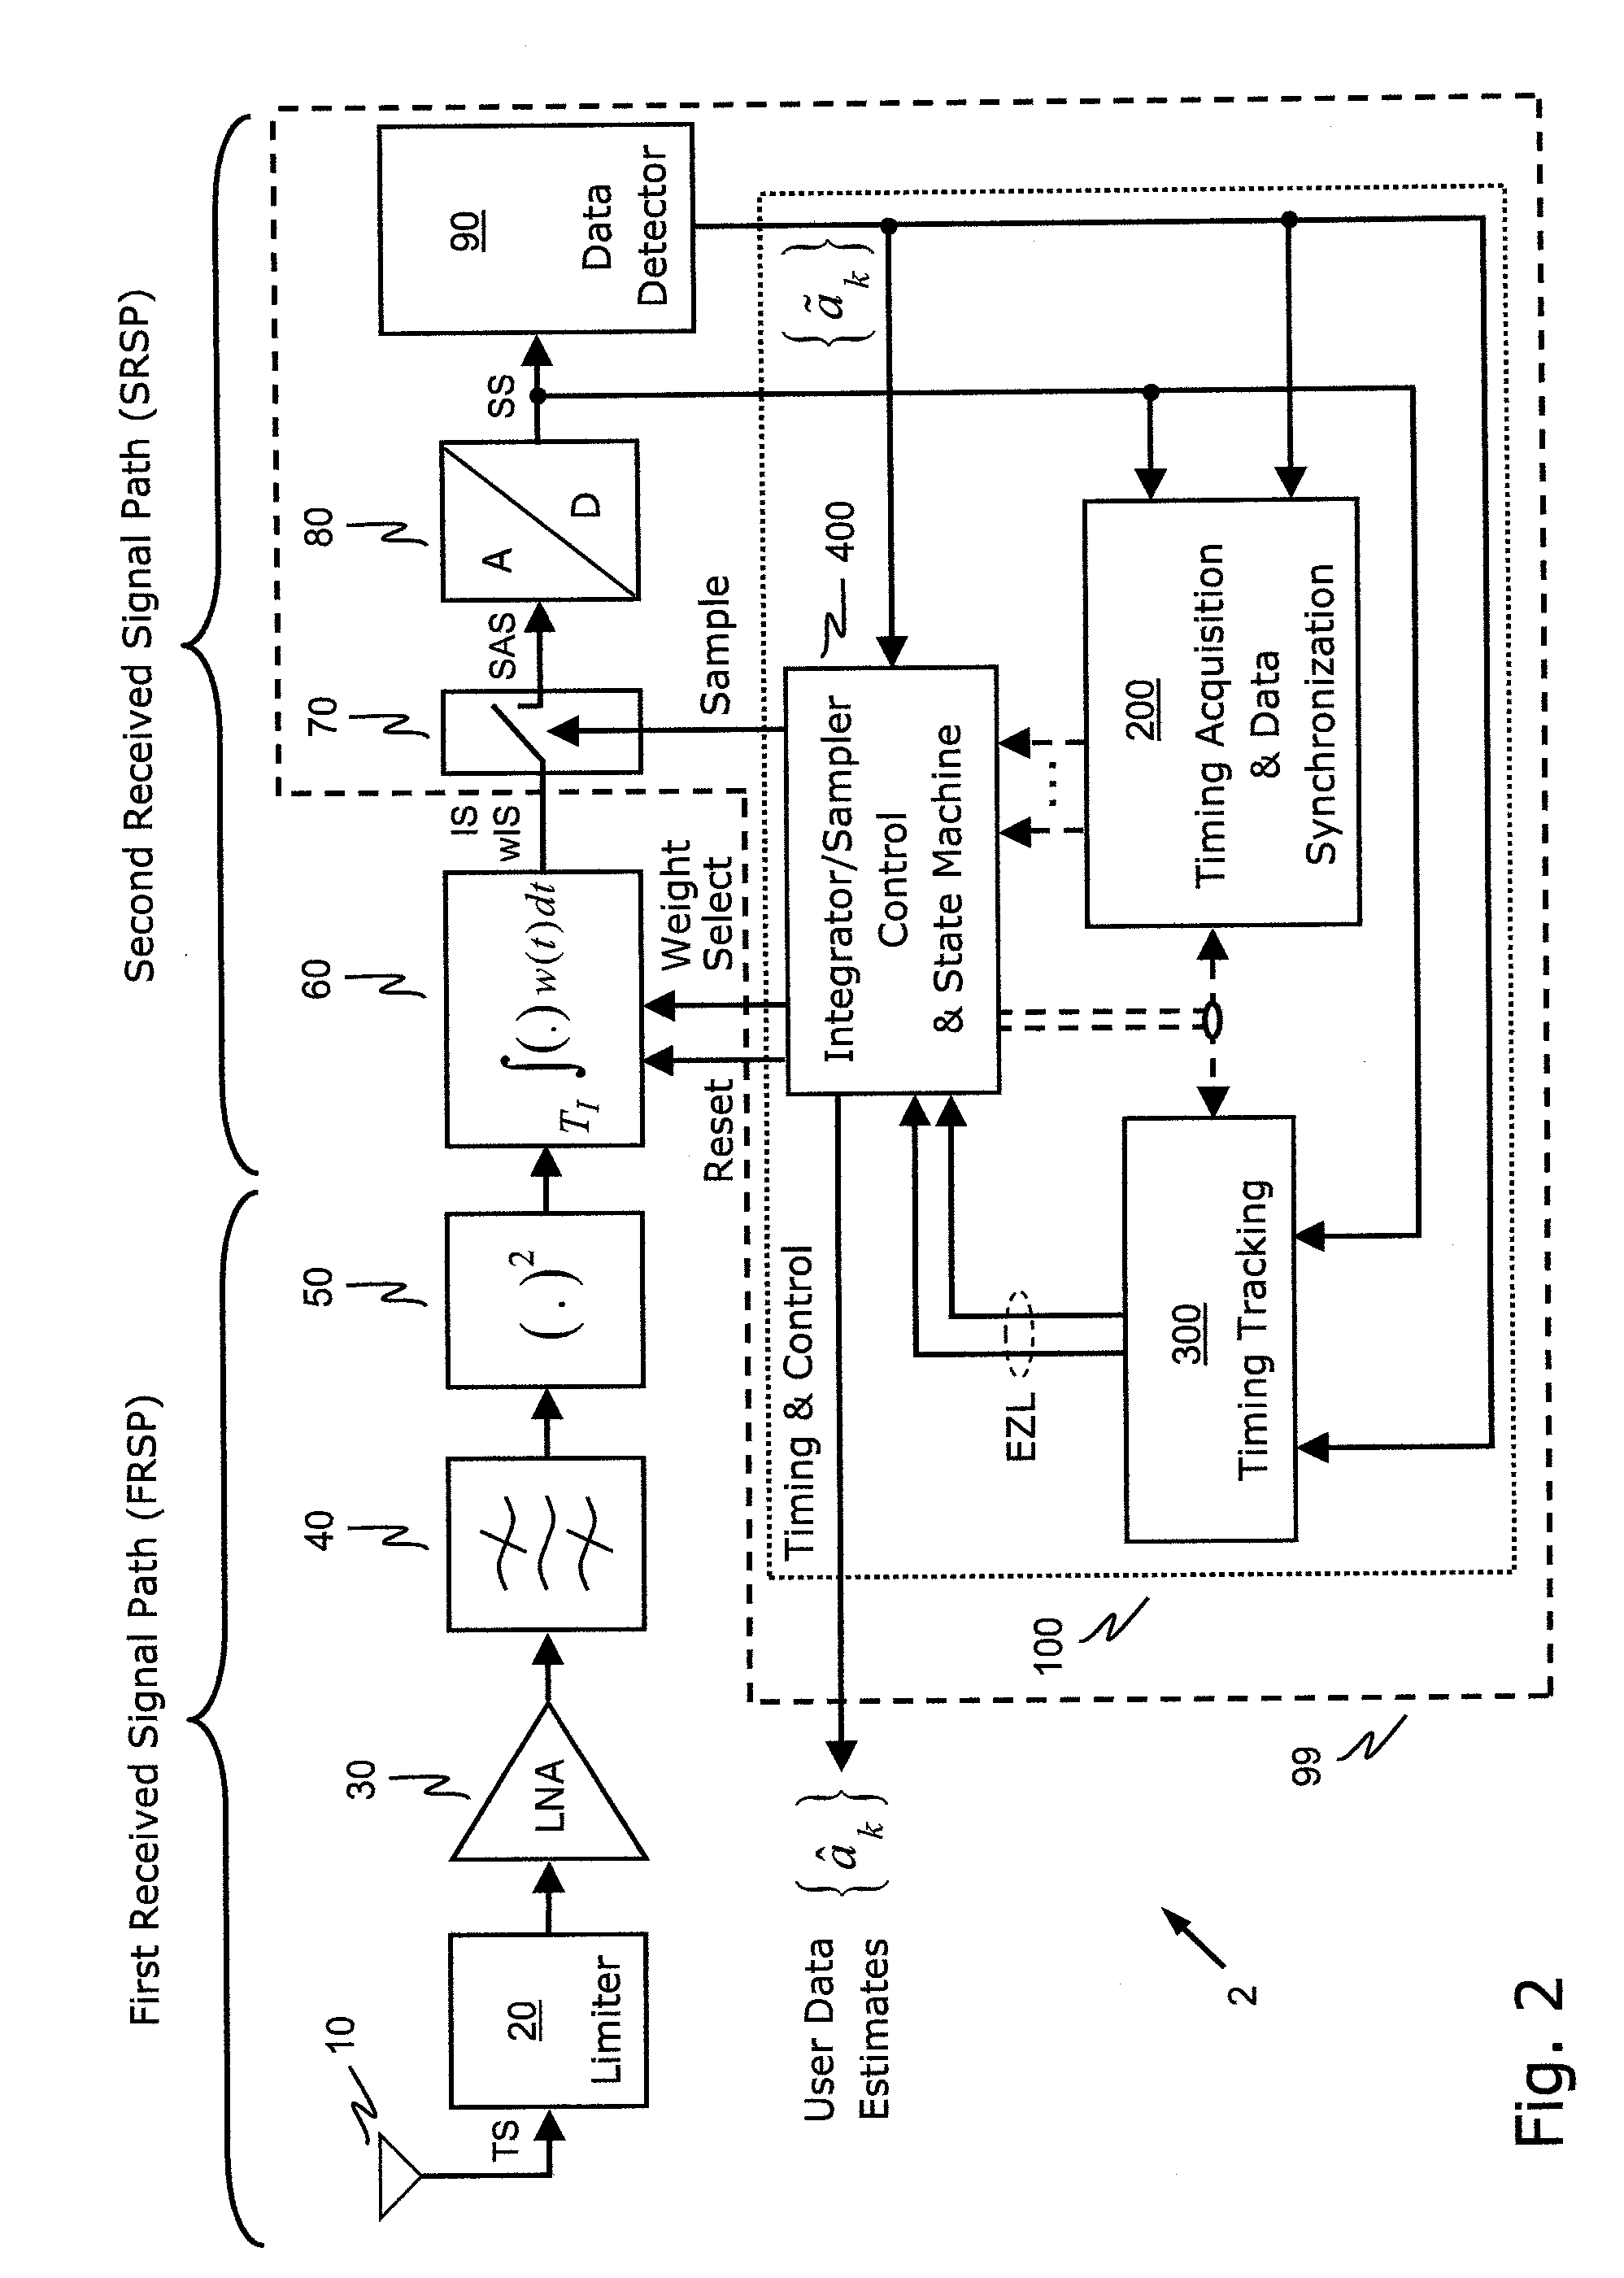 Robust non-coherent receiver for PAM-PPM signals